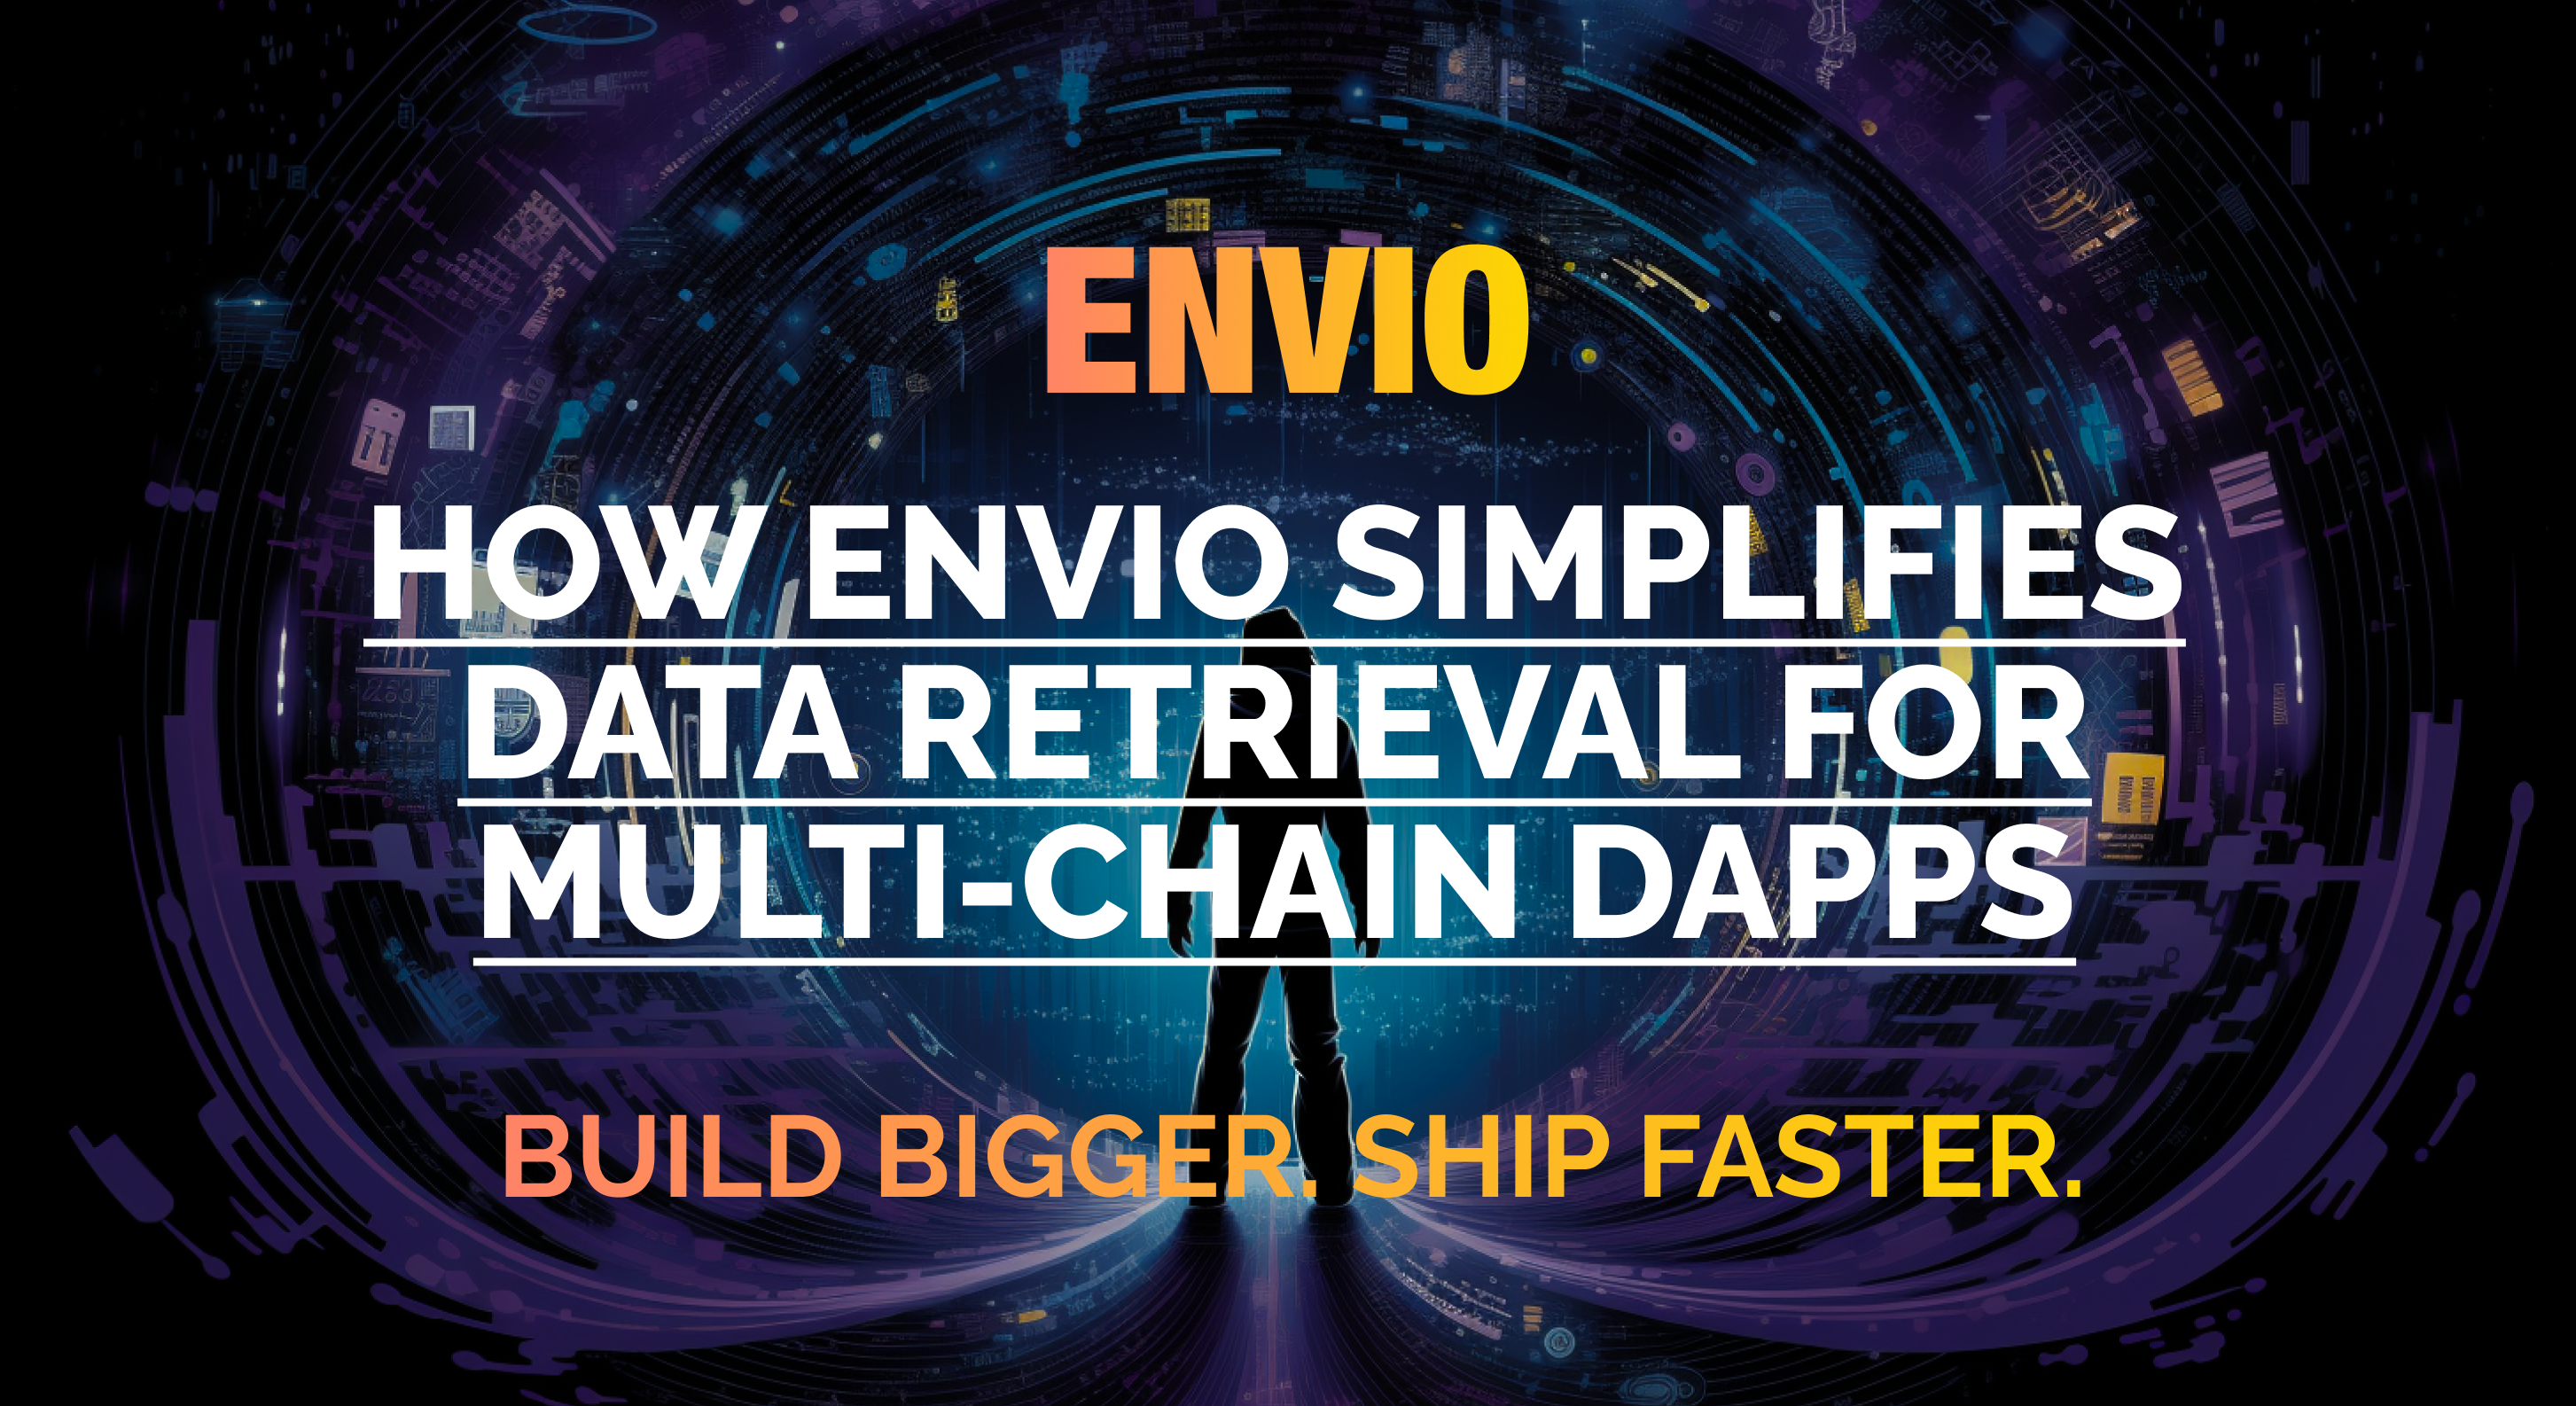 Cover Image for Simplifying Data Retrieval for Multi-chain dApps